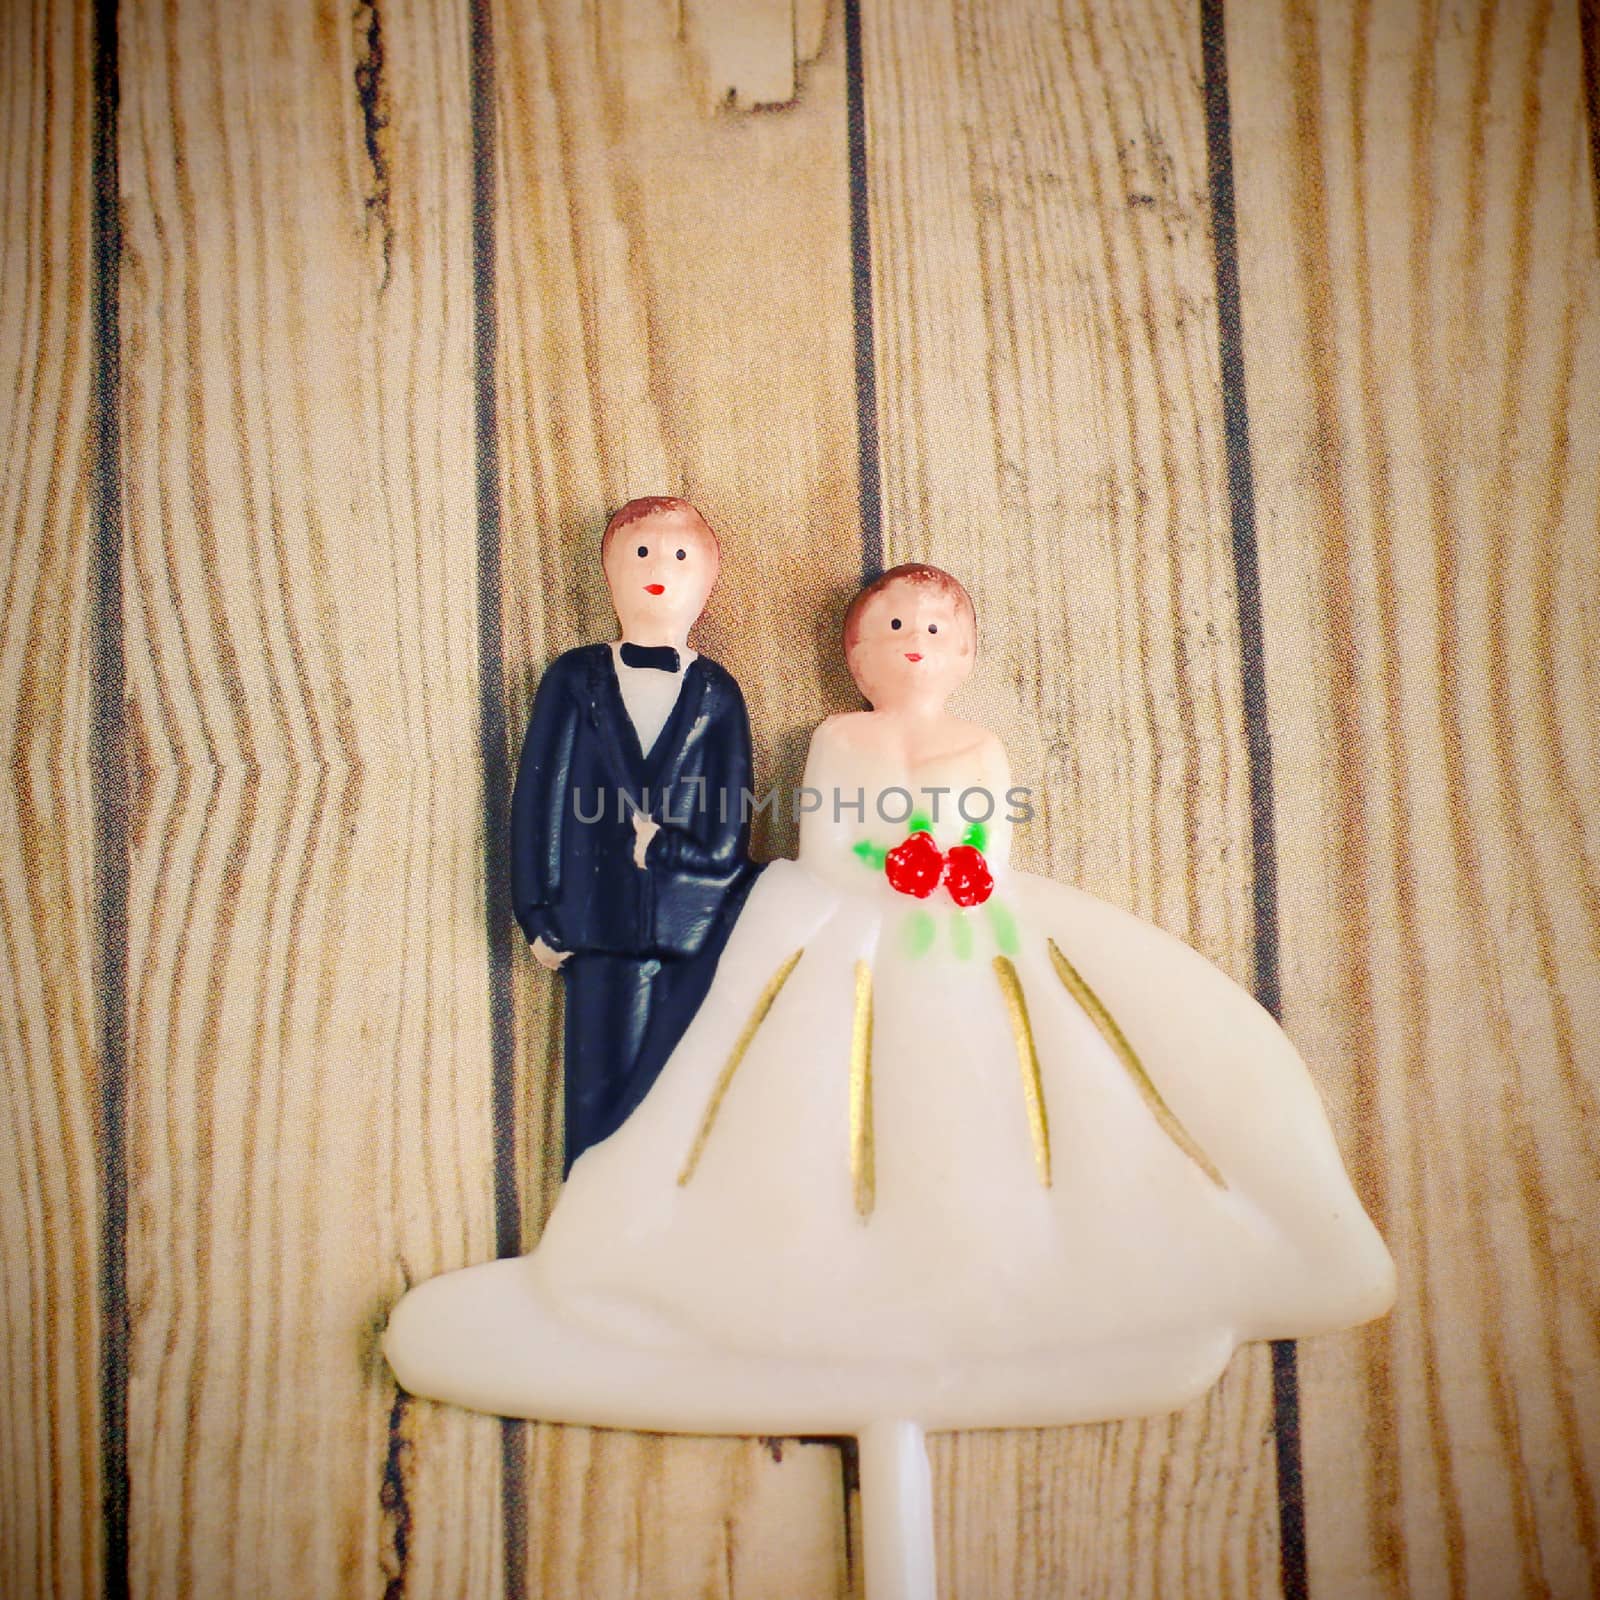 wedding bride and groom couple doll with retro filter effect